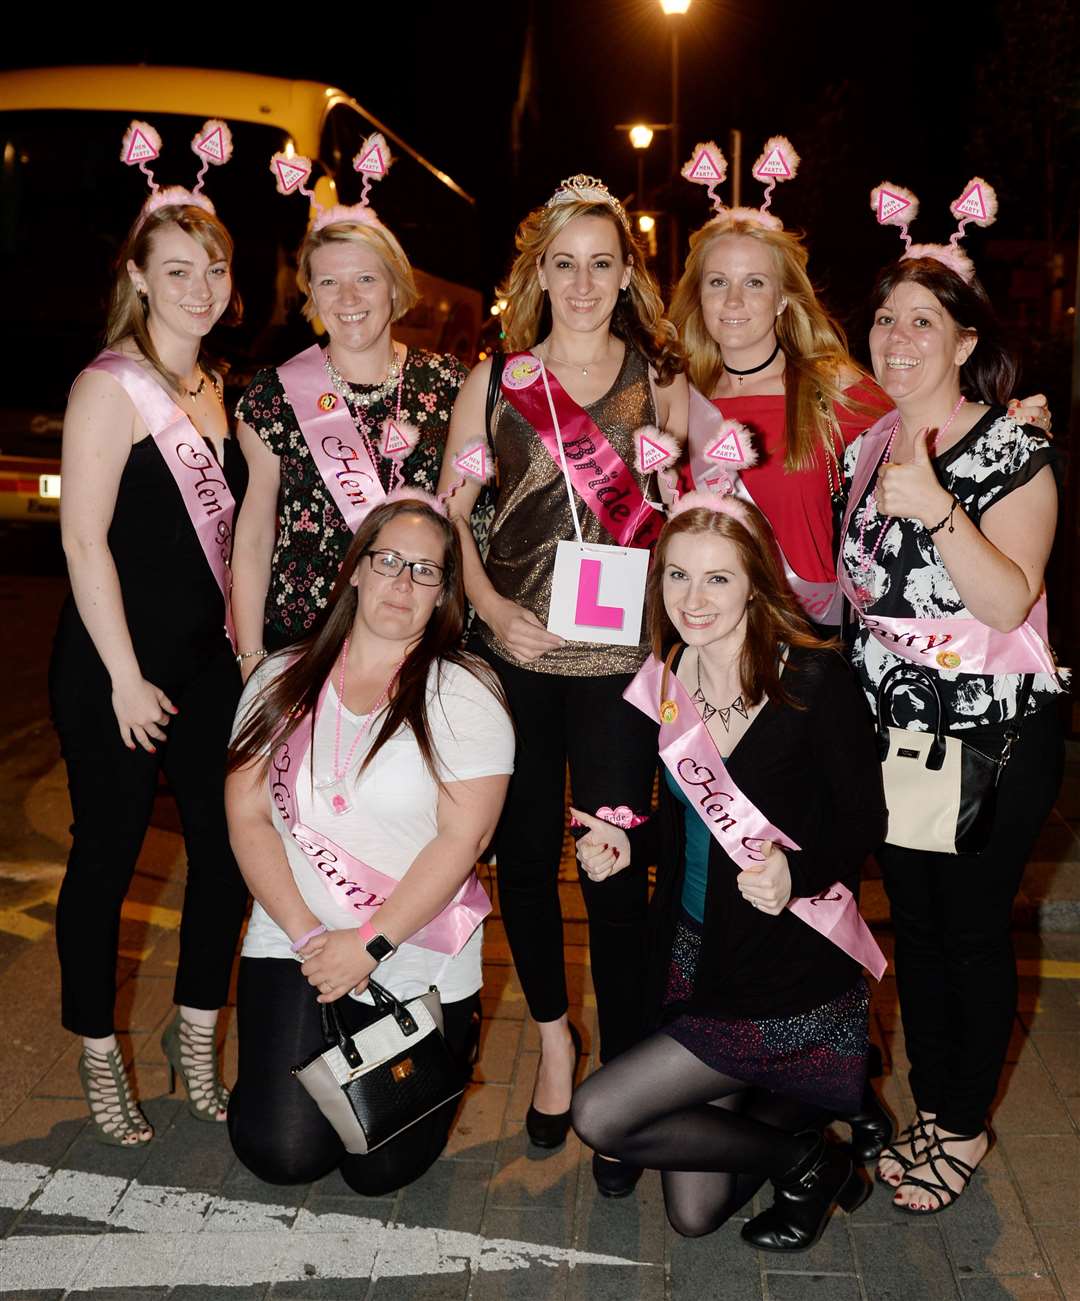 Picture: Alasdair Allen. Image No. 035029. L plate, Shelley Paton on her hen night with hens.